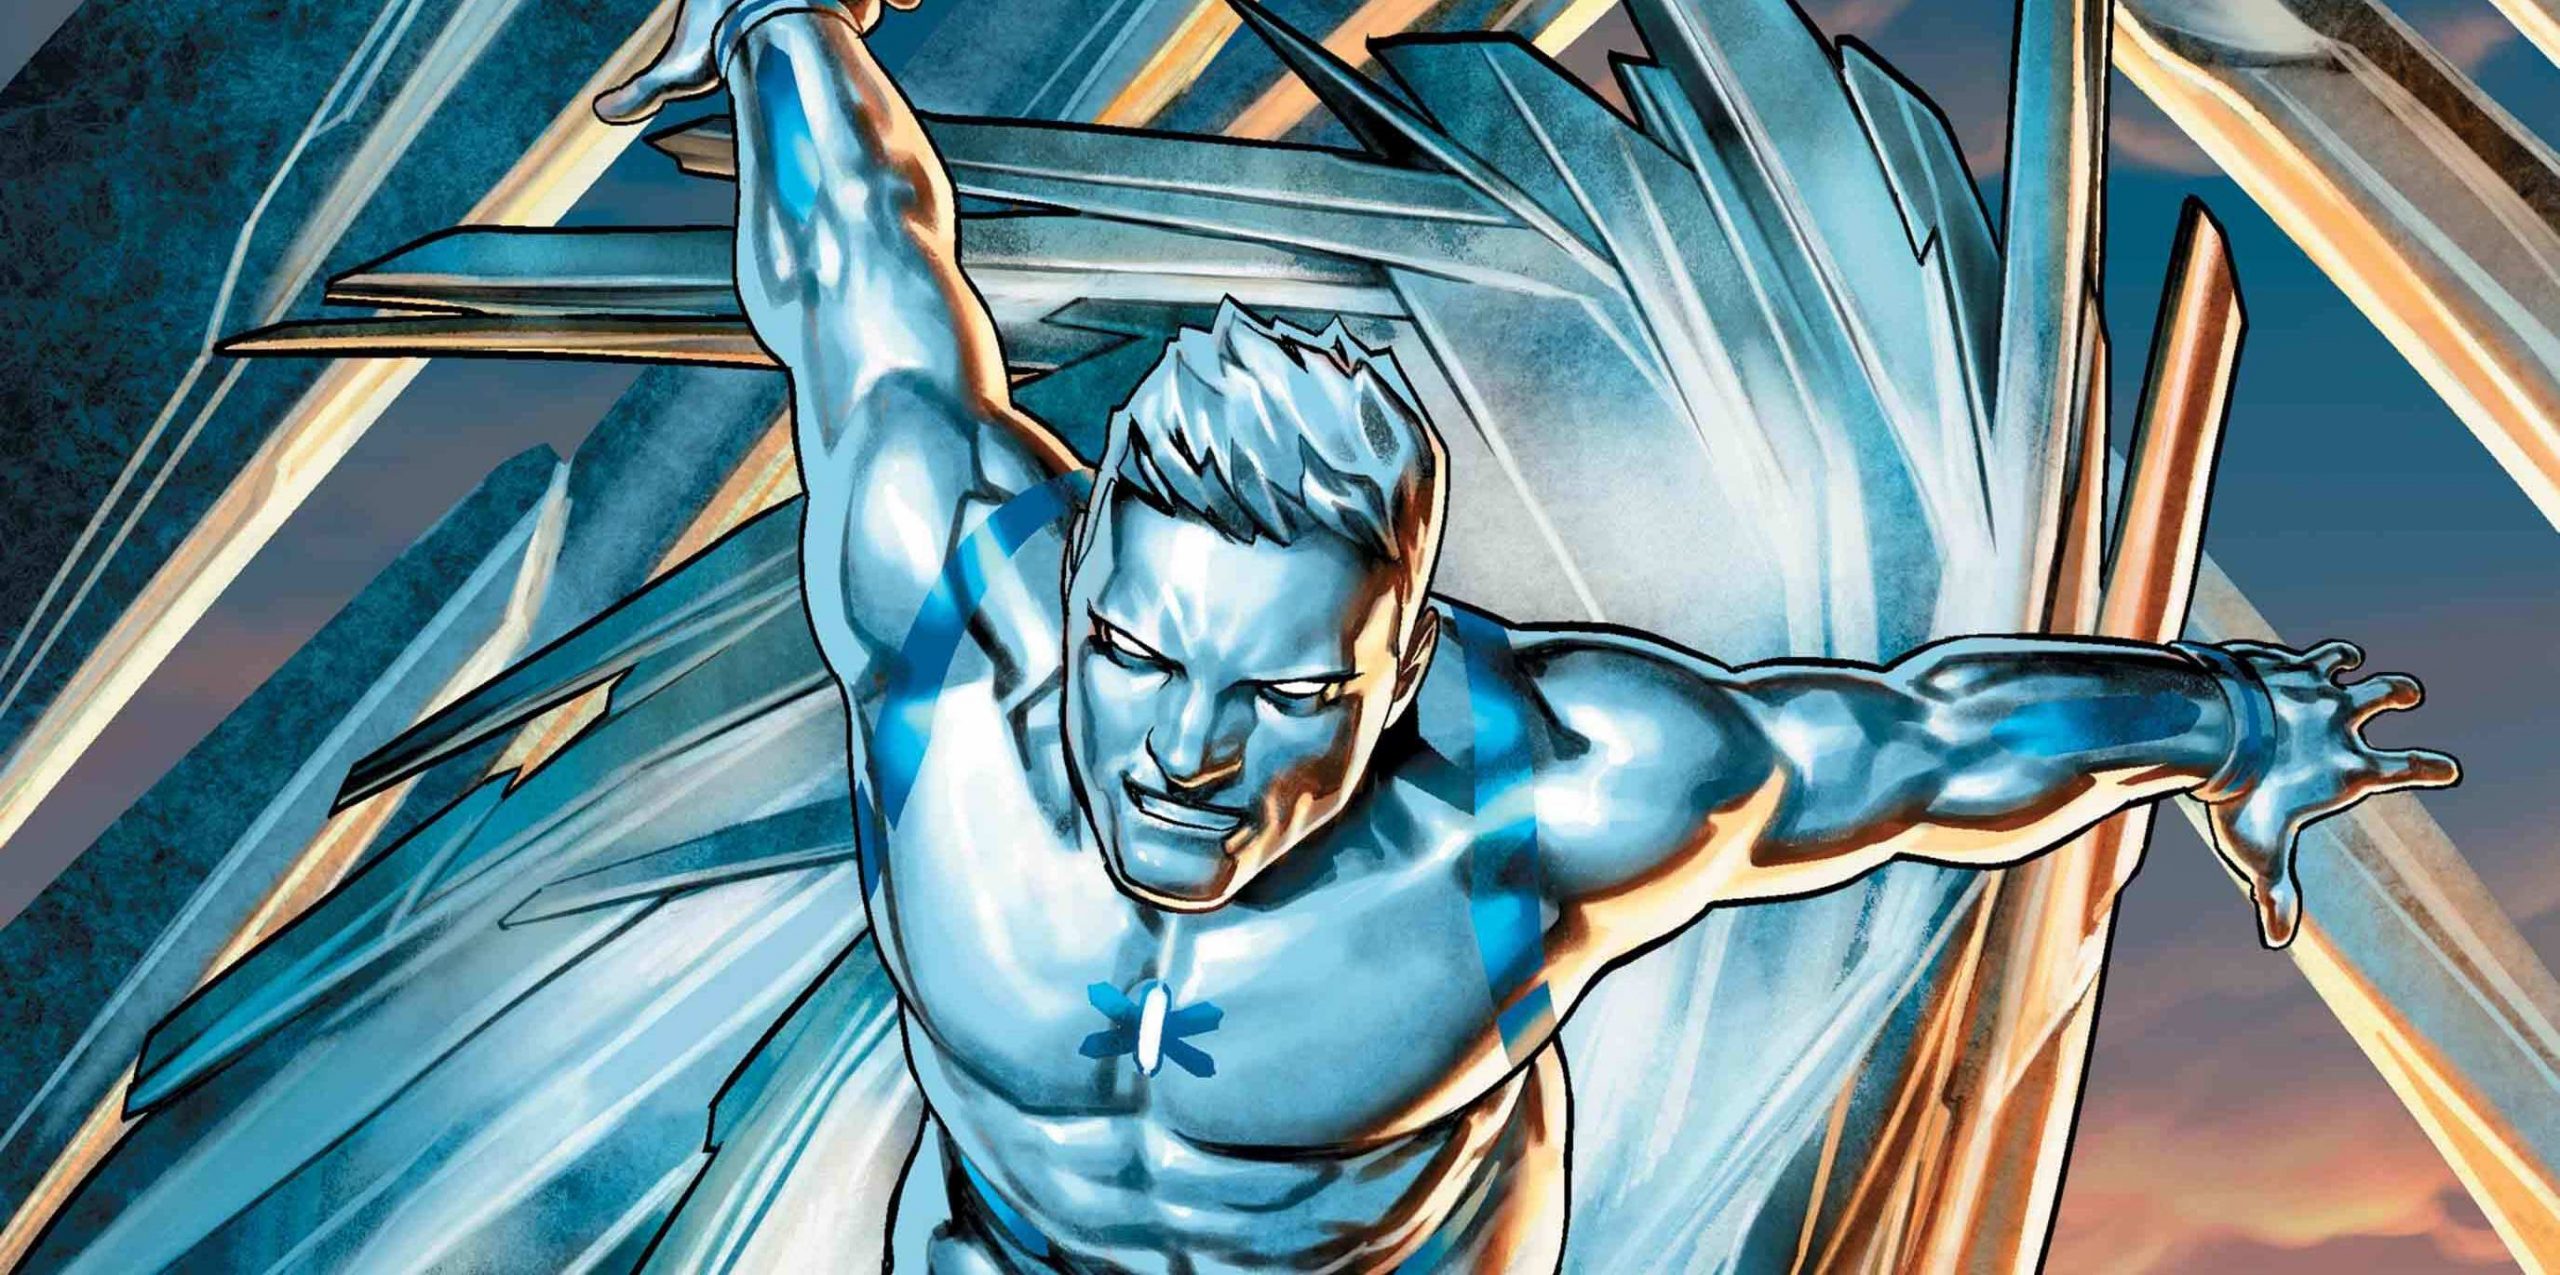 EXCLUSIVE Marvel Preview: Astonishing Iceman #1